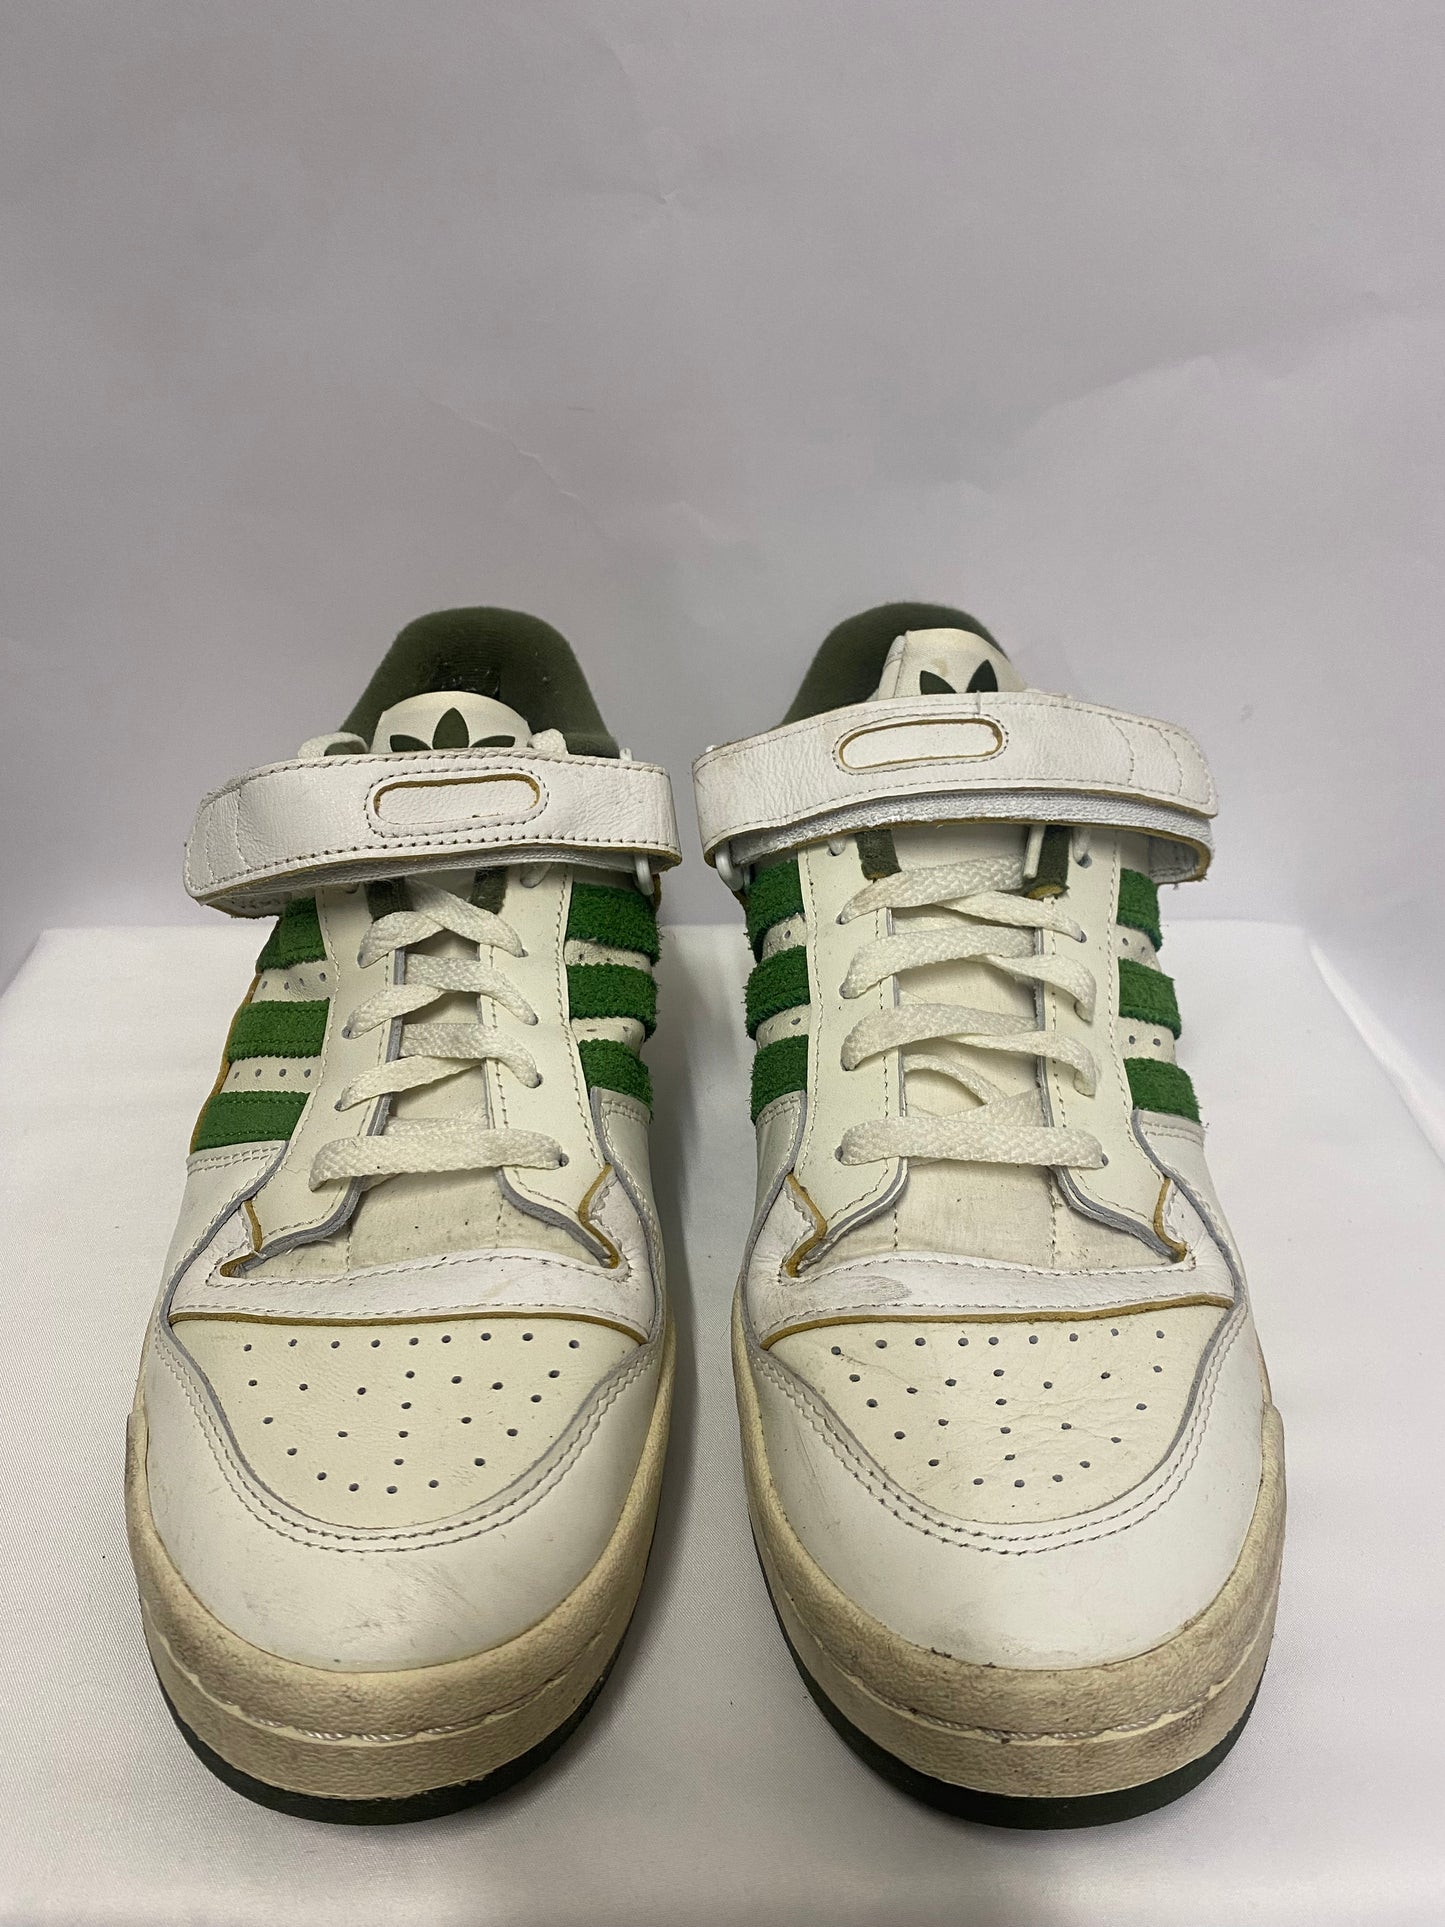 Adidas Forum 84 Low Green and White Men's 9.5